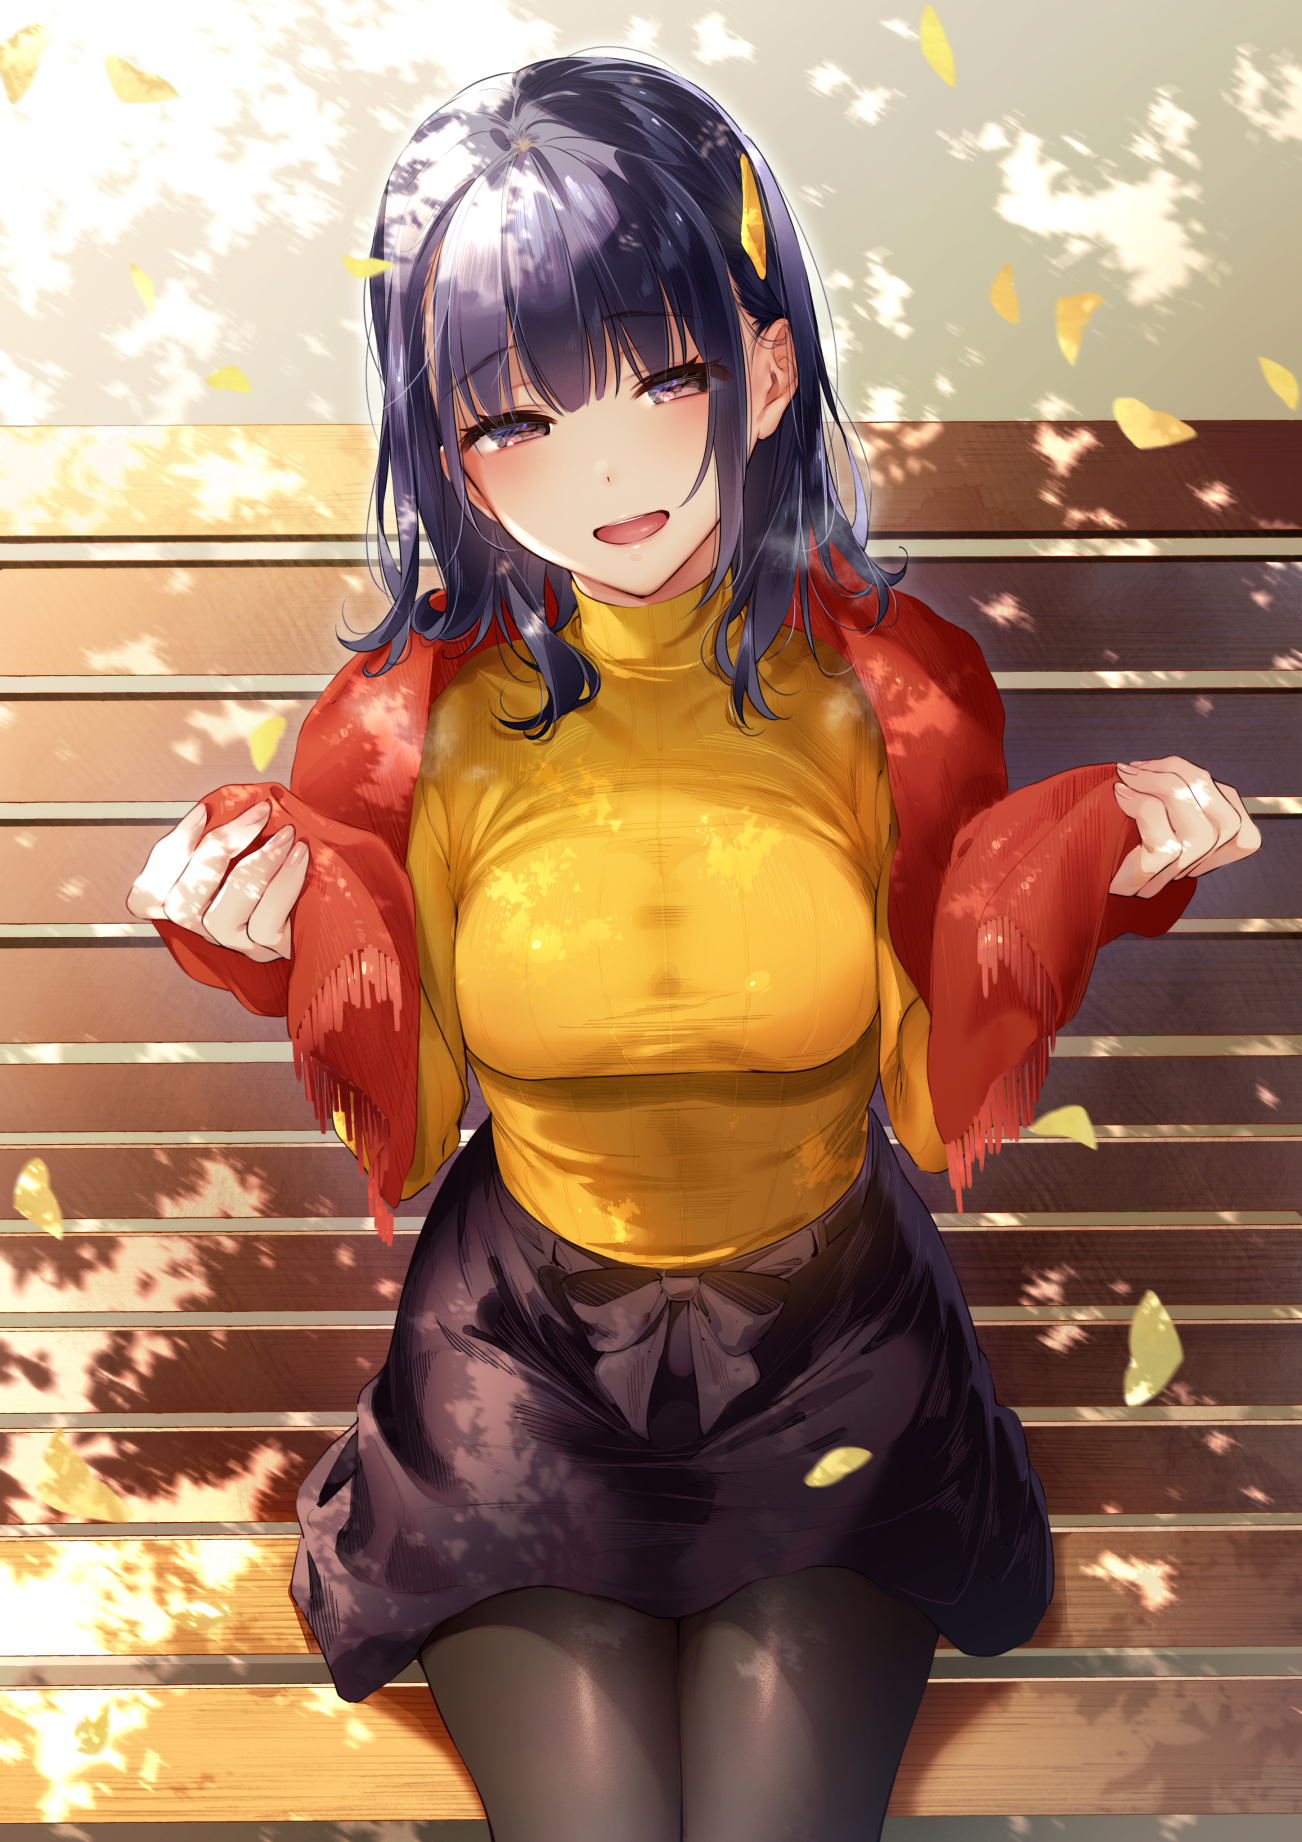 Anime 1302x1842 anime anime girls Hizuki Akira high angle bench fall leaves dark hair open mouth sweater skirt scarf pantyhose frontal view smiling looking at viewer women outdoors outdoors fallen leaves